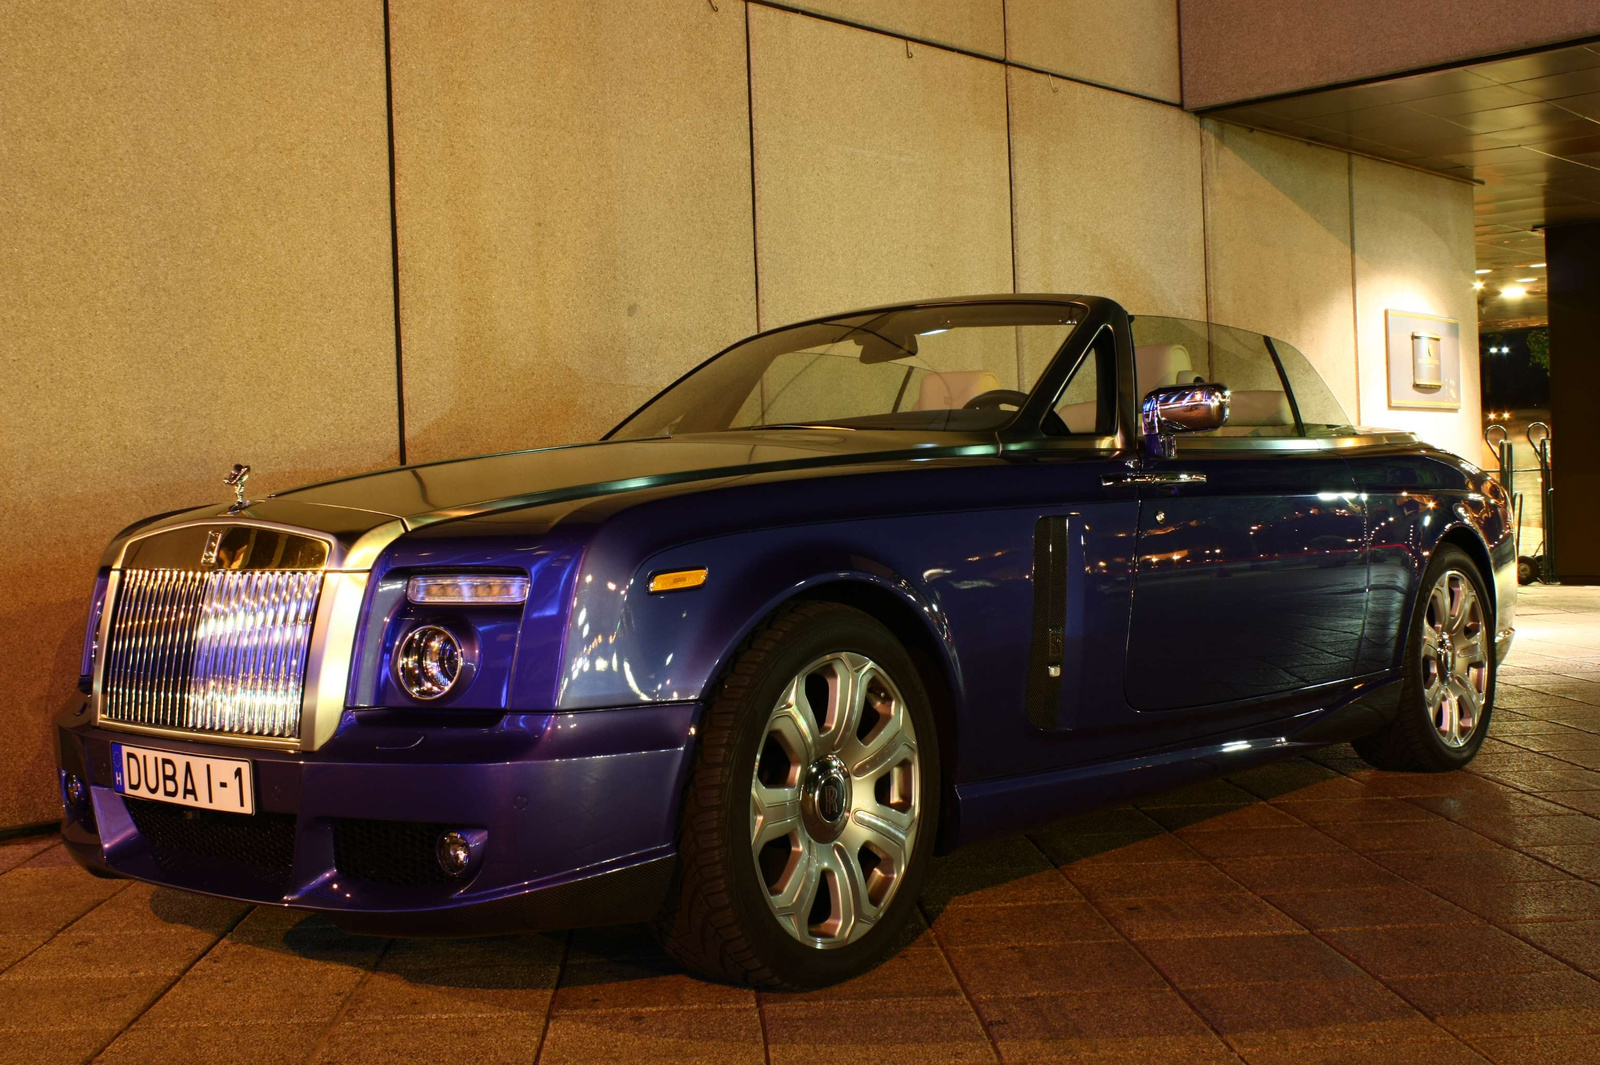 Rolls-Royce Drophead Coupe 008 (Mansory Bel Air)